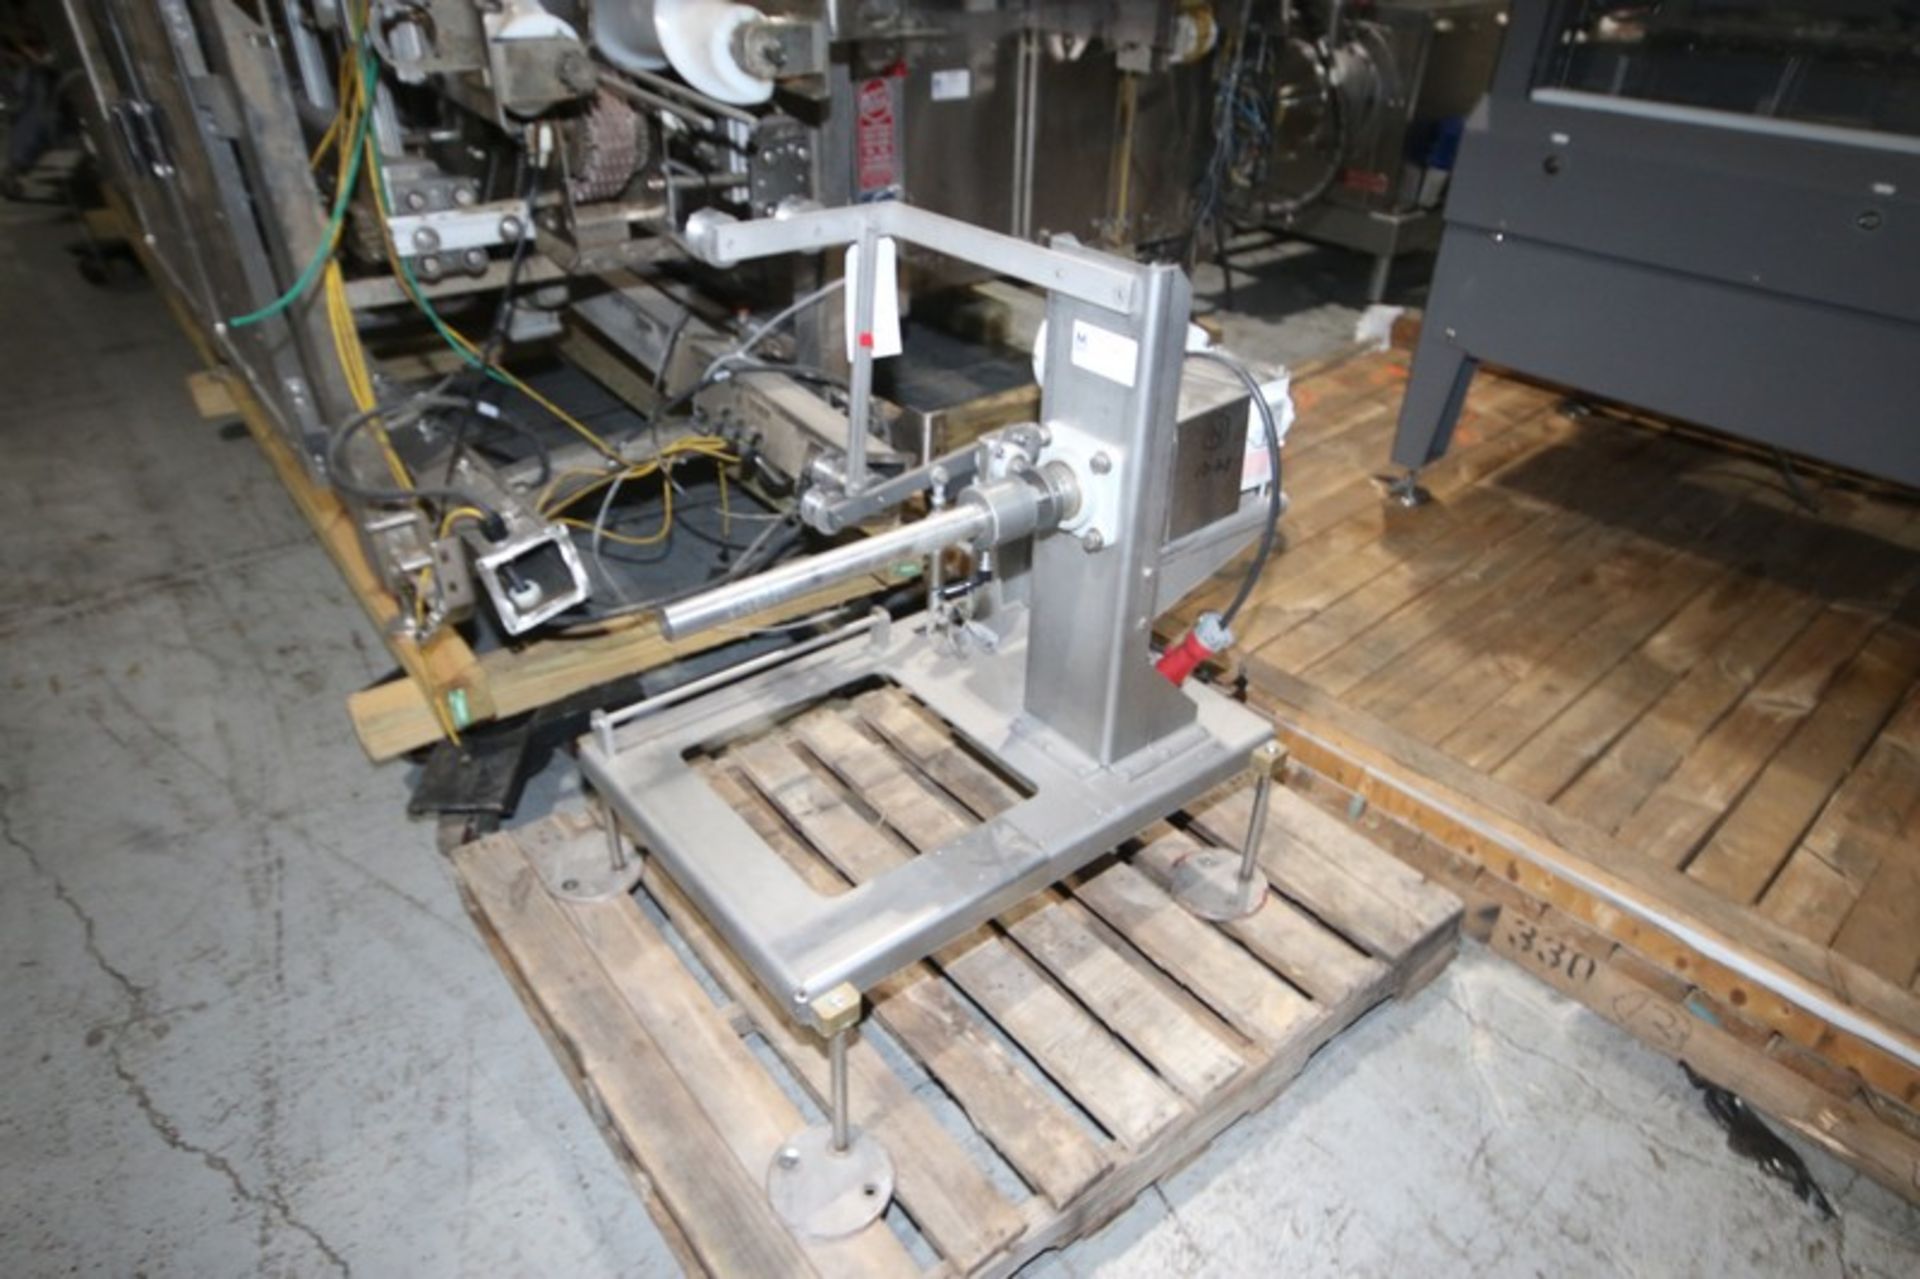 Adco Wrap Around Sleever, M/N 12WAS-2DO-WD, S/N 5172H2, 480 Volts, 3 Phase, with Infeed Conveyor - Image 9 of 11